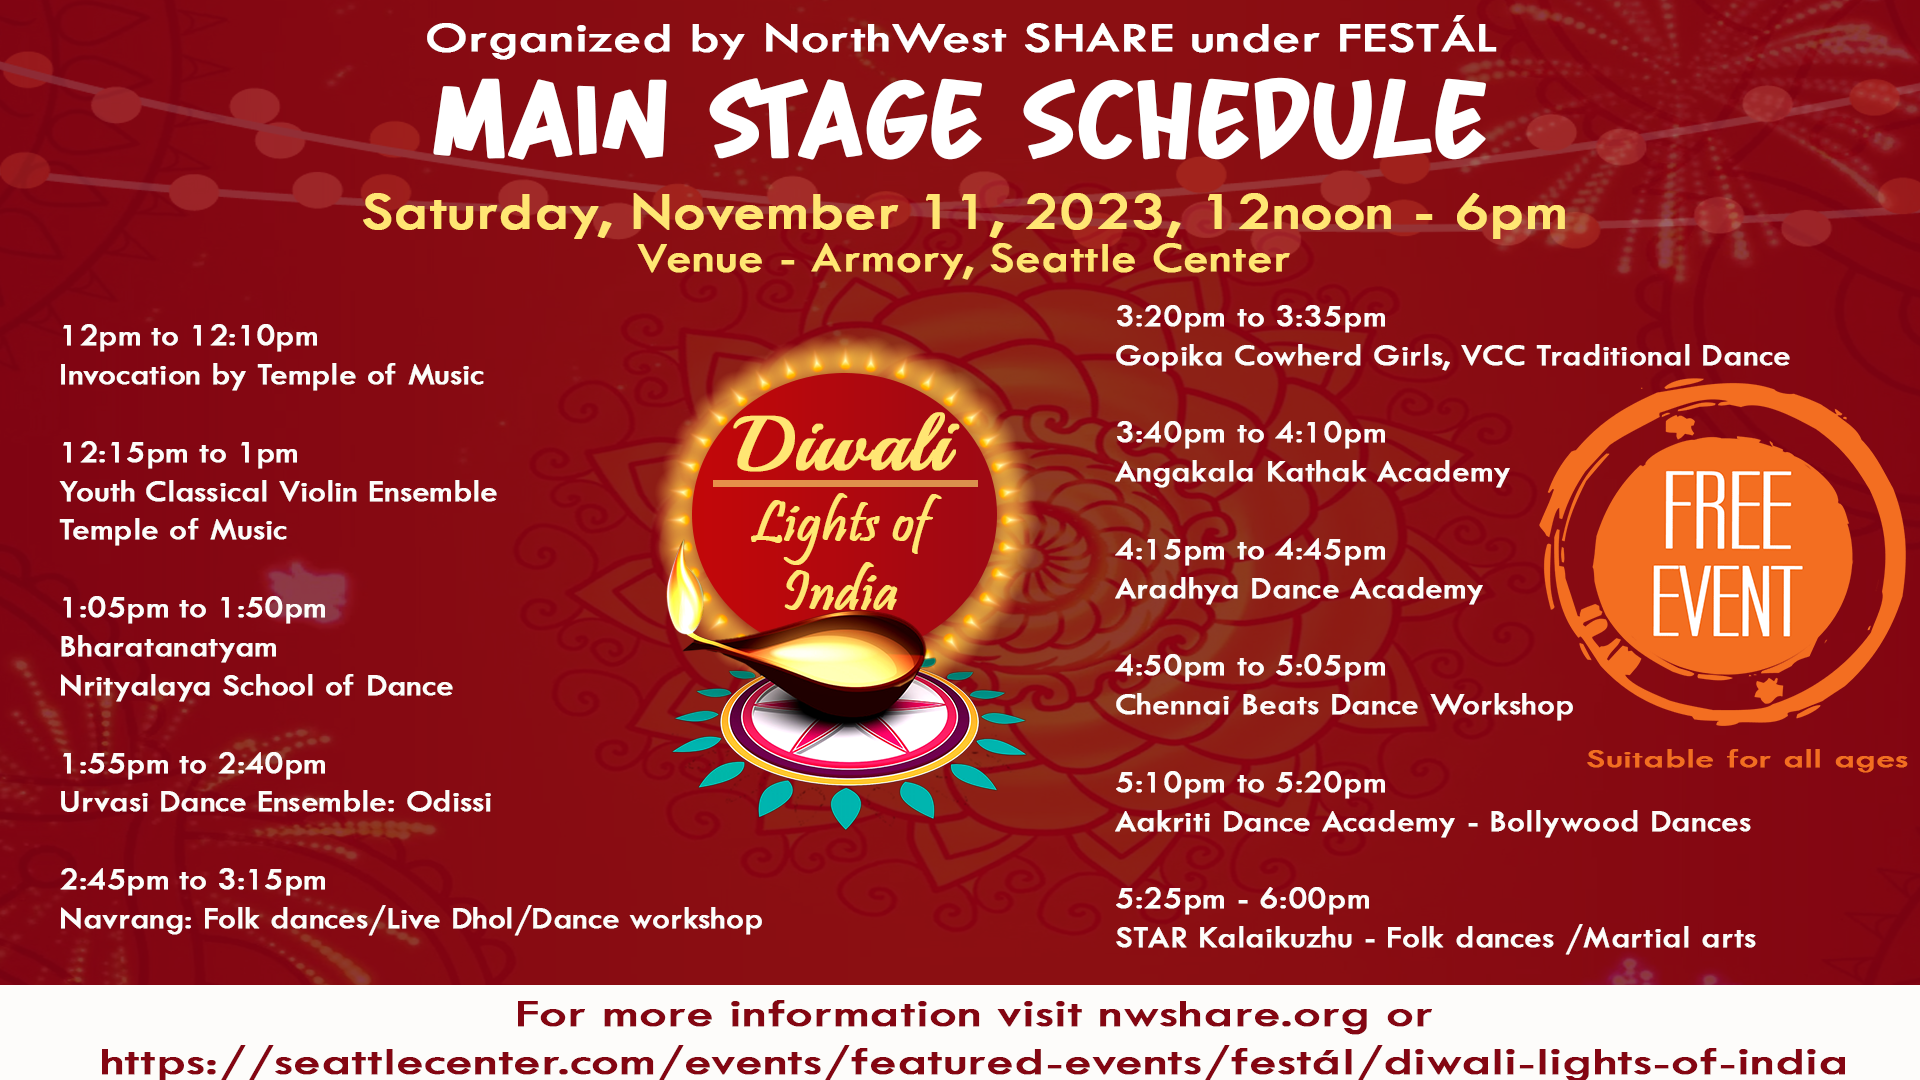 https://www.nwshare.org/wp-content/uploads/2023/11/LED-MainStageSchedule-1920x1080.png